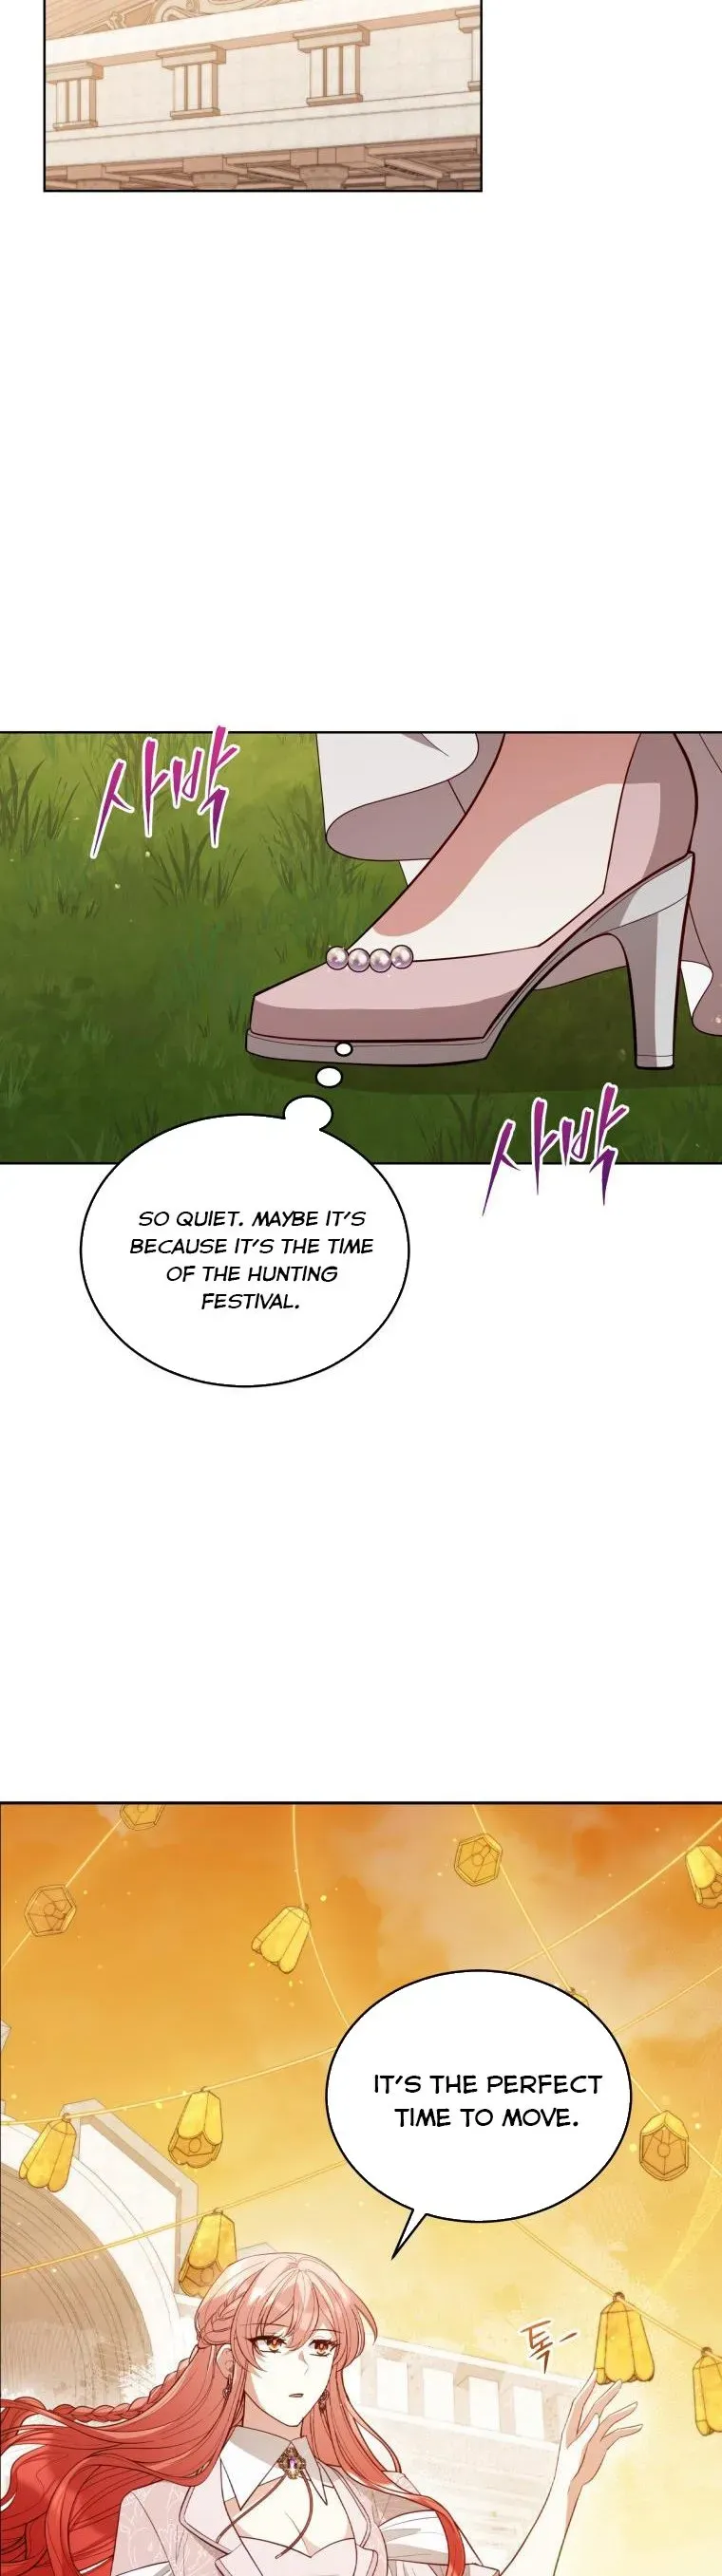 Untouchable Lady Chapter 84 page 11